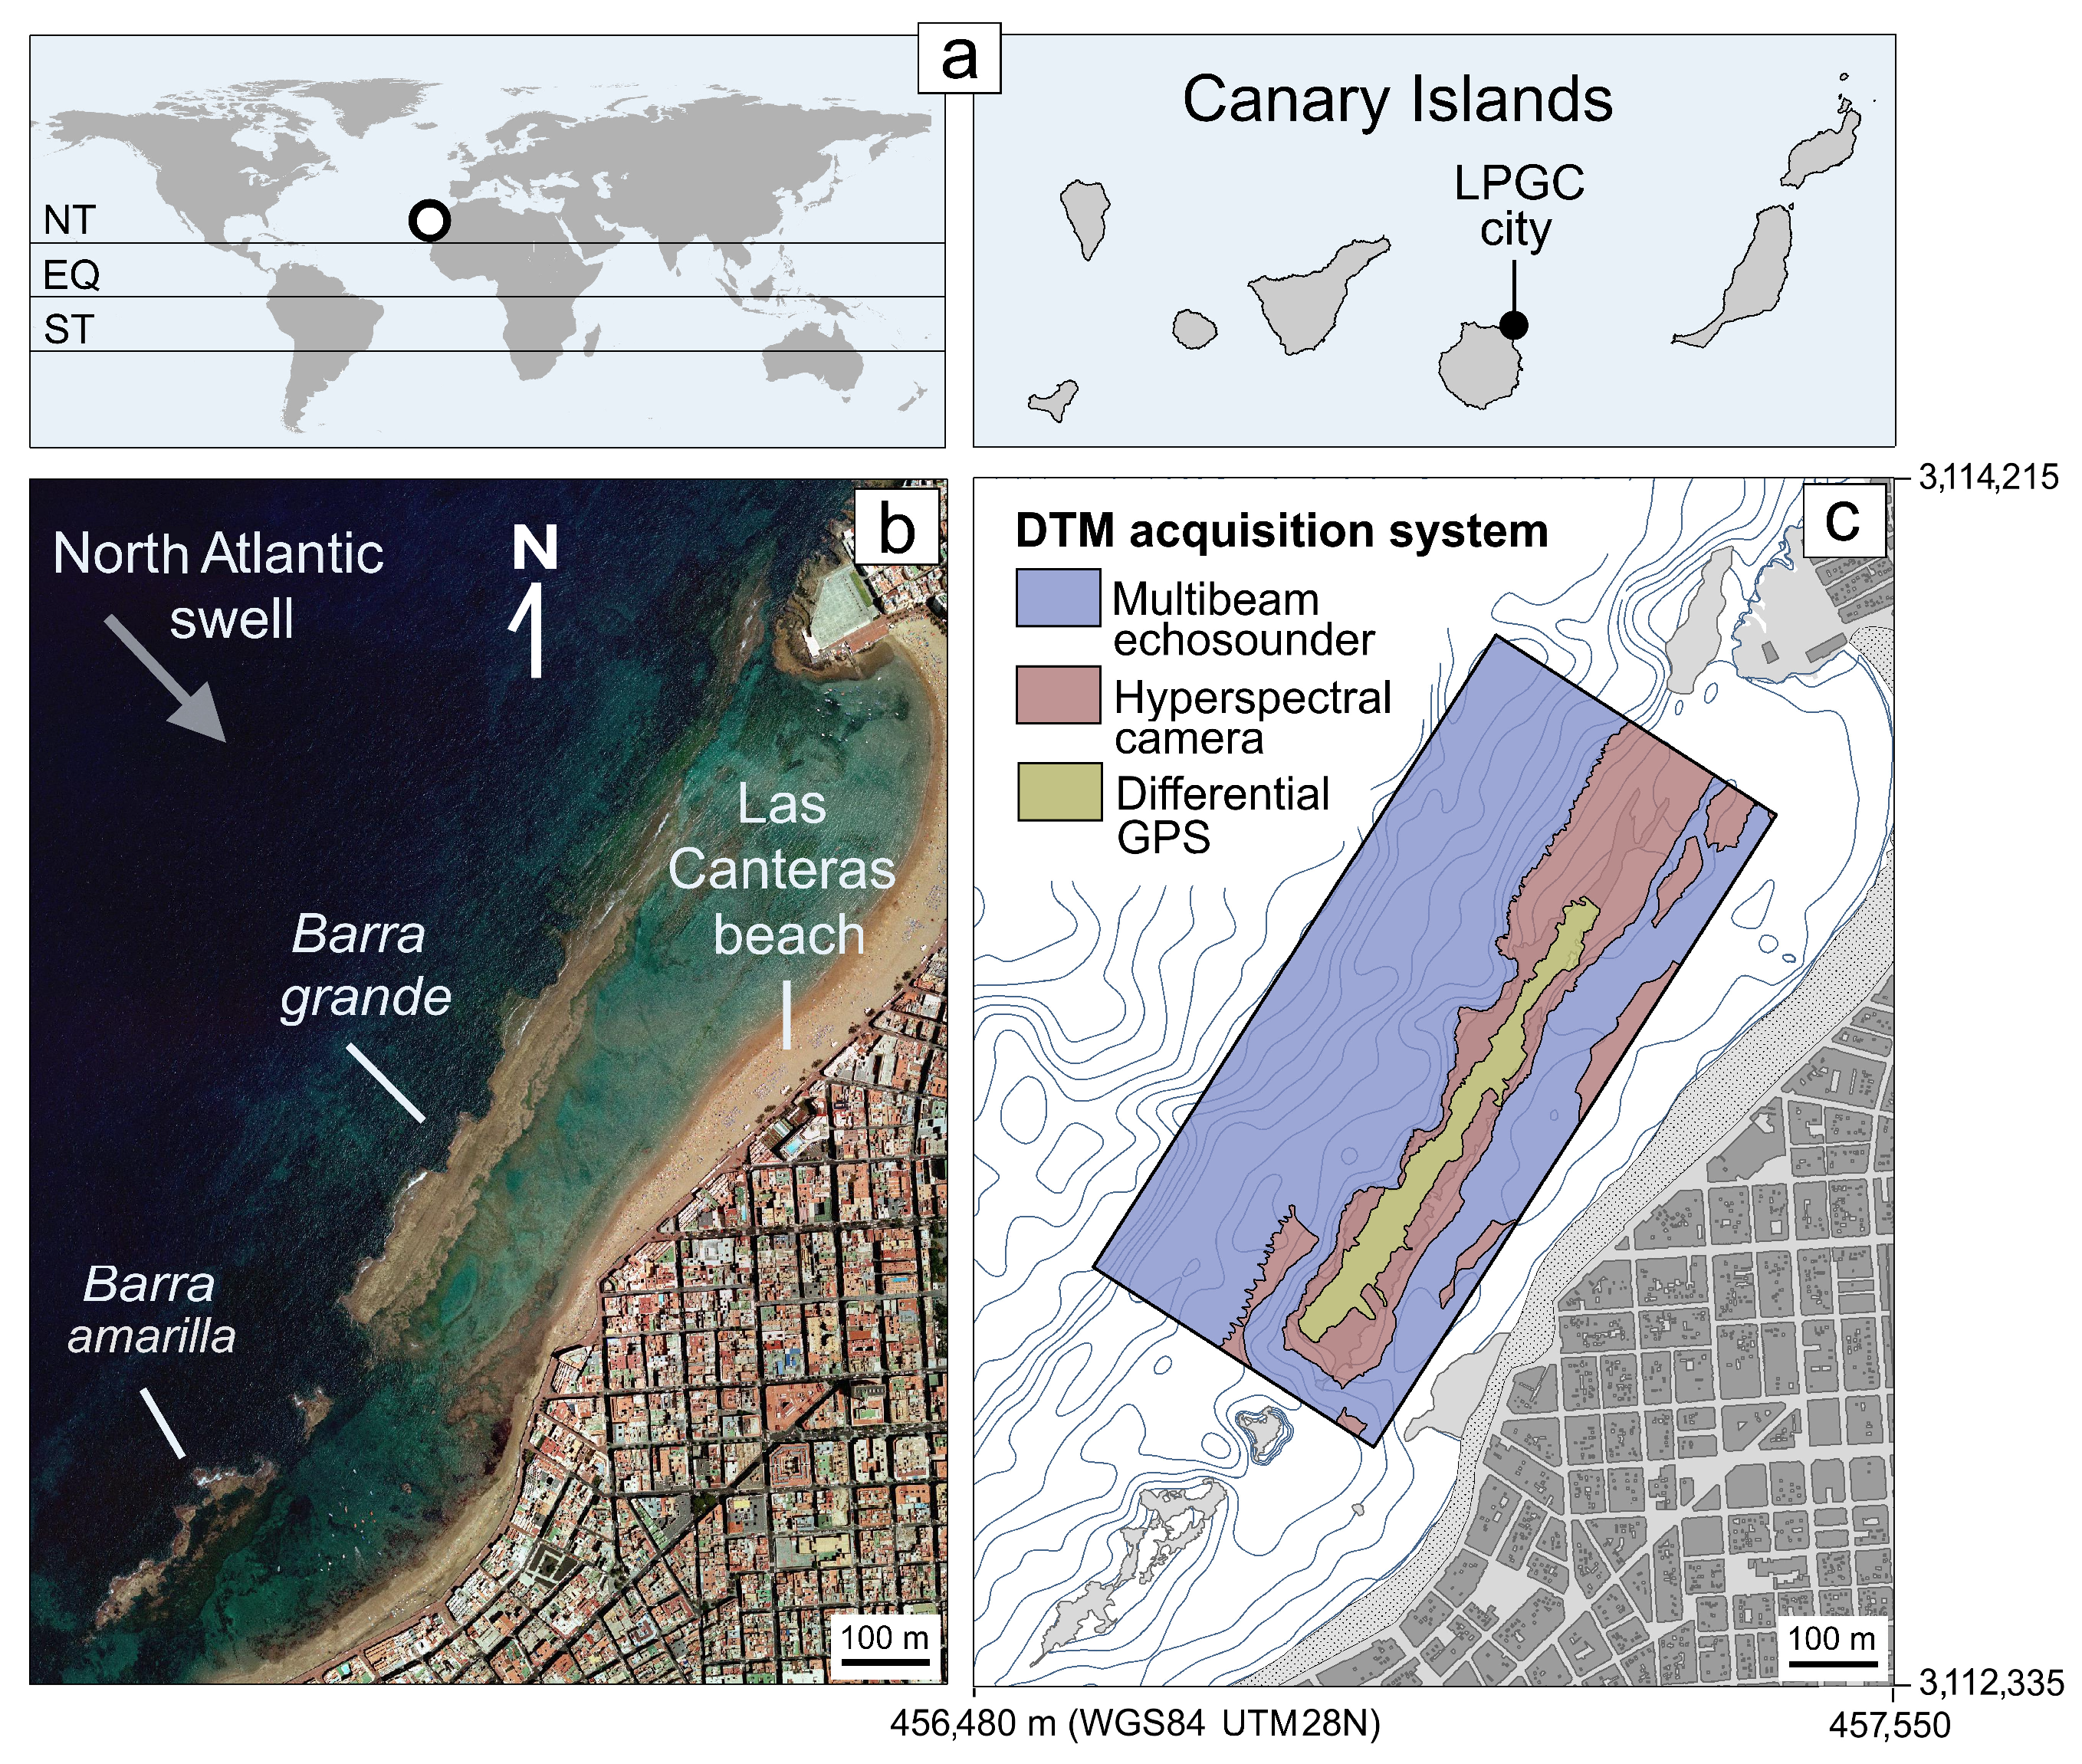 Remote Sensing | Free Full-Text | Holocene Erosional Processes in a Highly  Exposed Intertidal Sandstone Reef Inferred from Remote Sensing Data